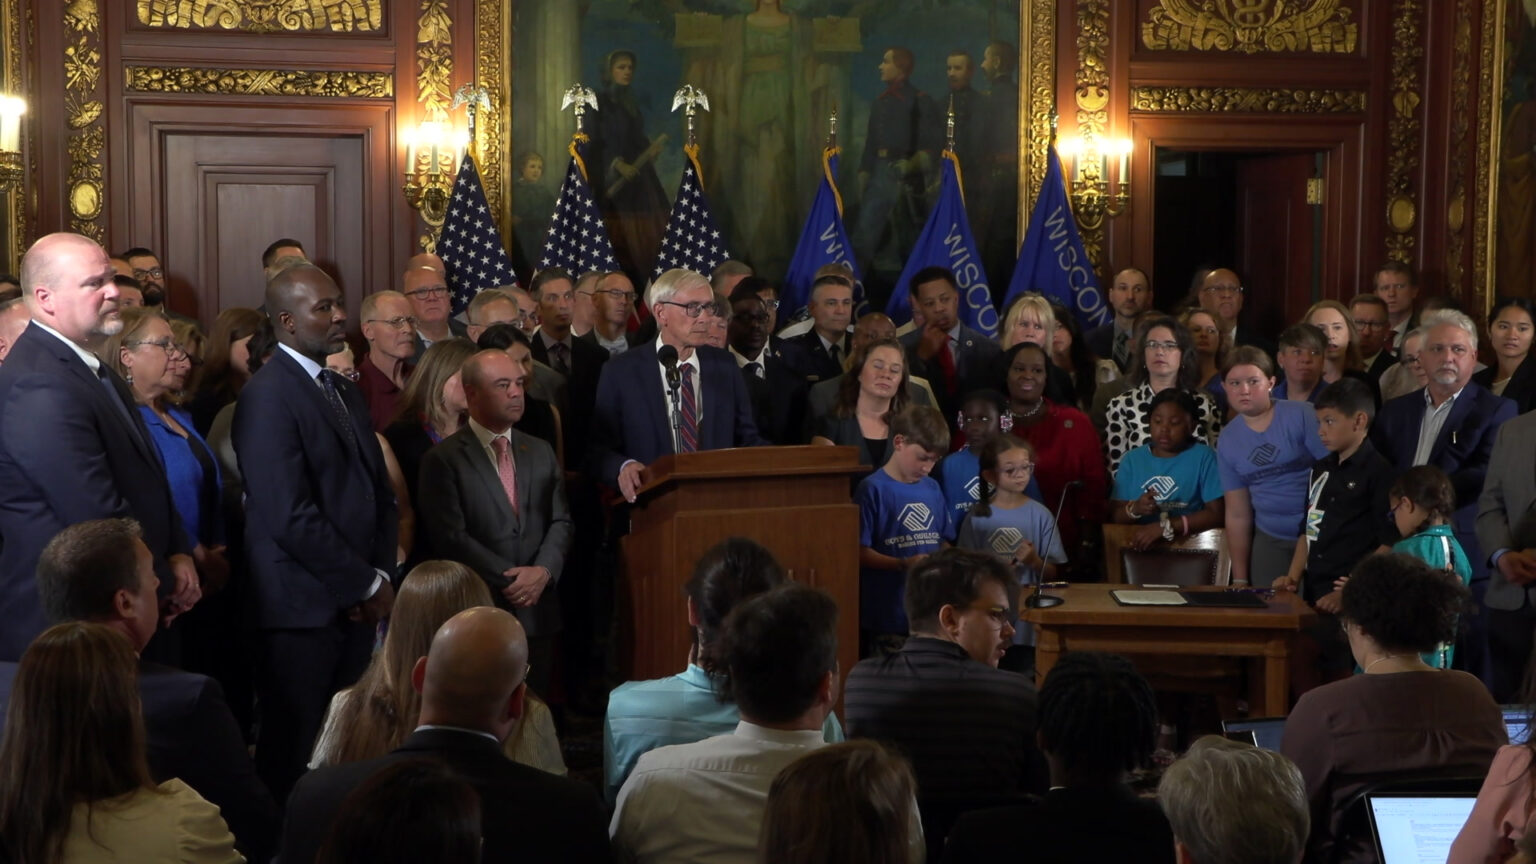 Tony Evers stands and speaks into a microphone mounted on a wood podium, with people standing behind him and to his side, and more people seated facing him, in a room with U.S. and Wisconsin flags, a painting, electric wall sconce lighting, and gold-colored filigree décor framing two doors.